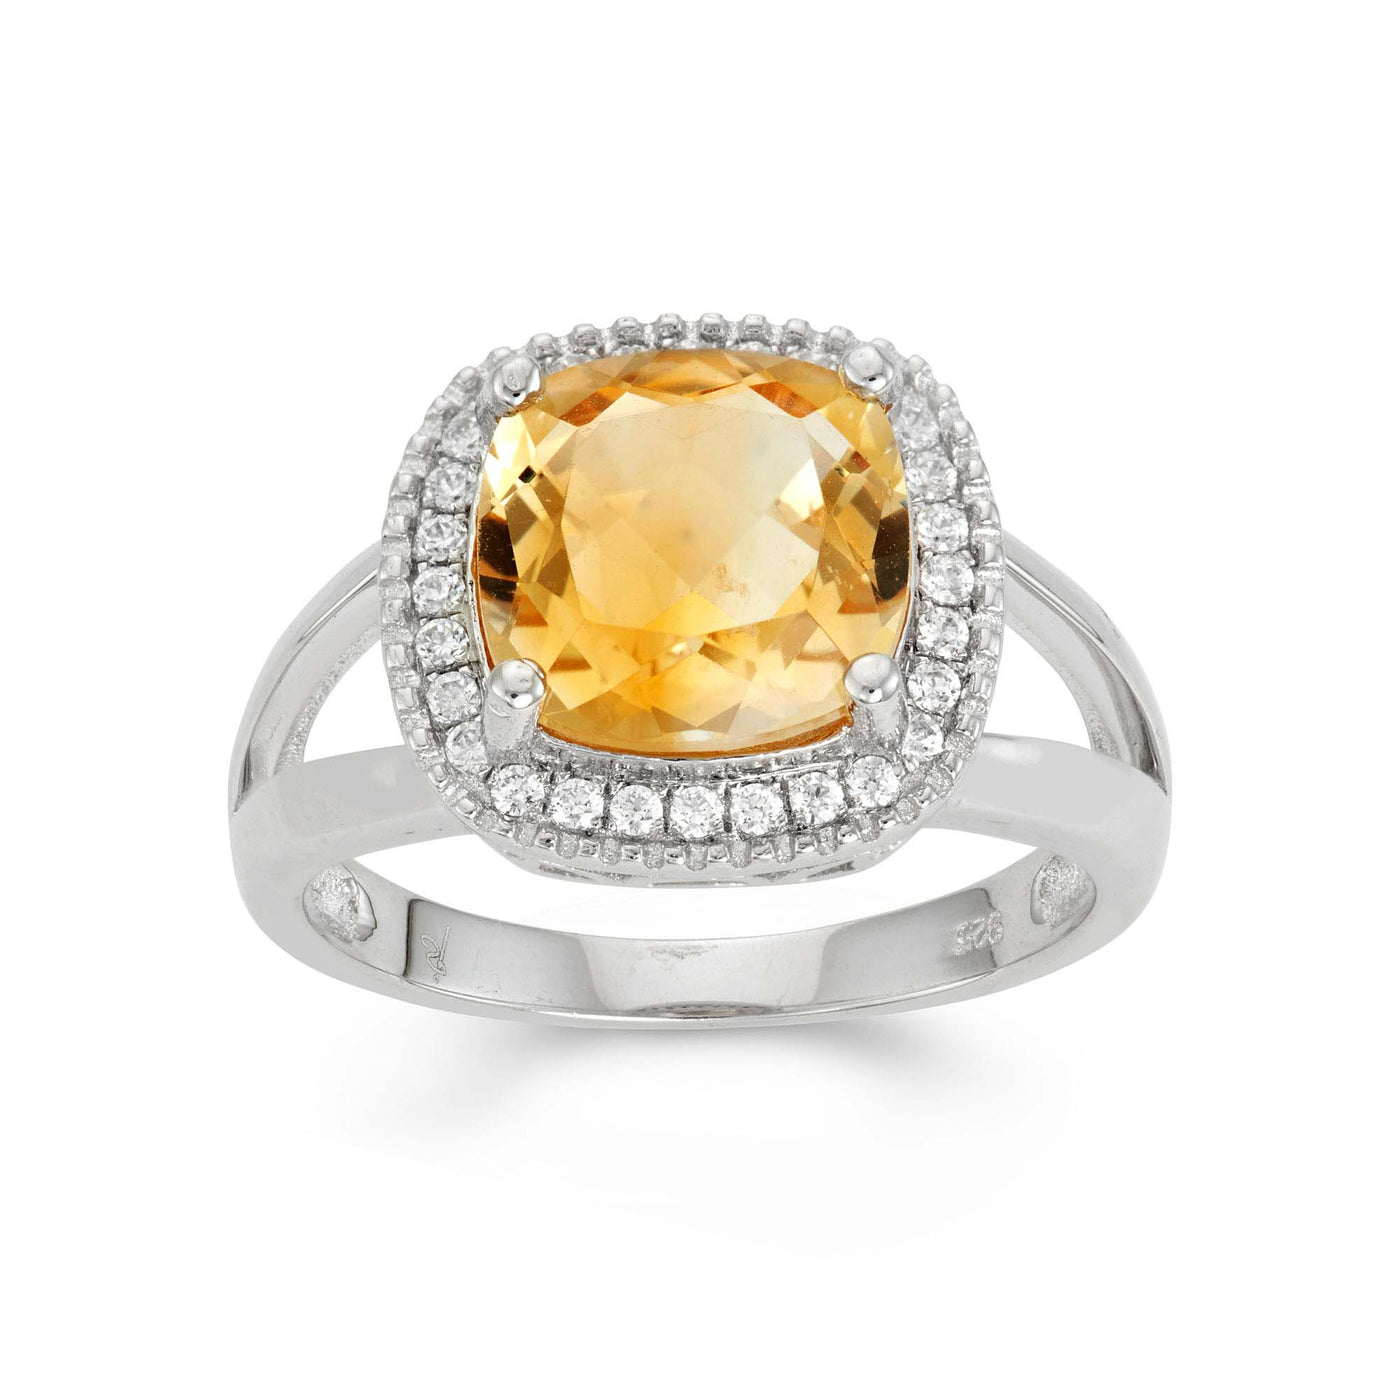 Rebecca Sloane Silver Ring With Square Faceted Citrine and CZ